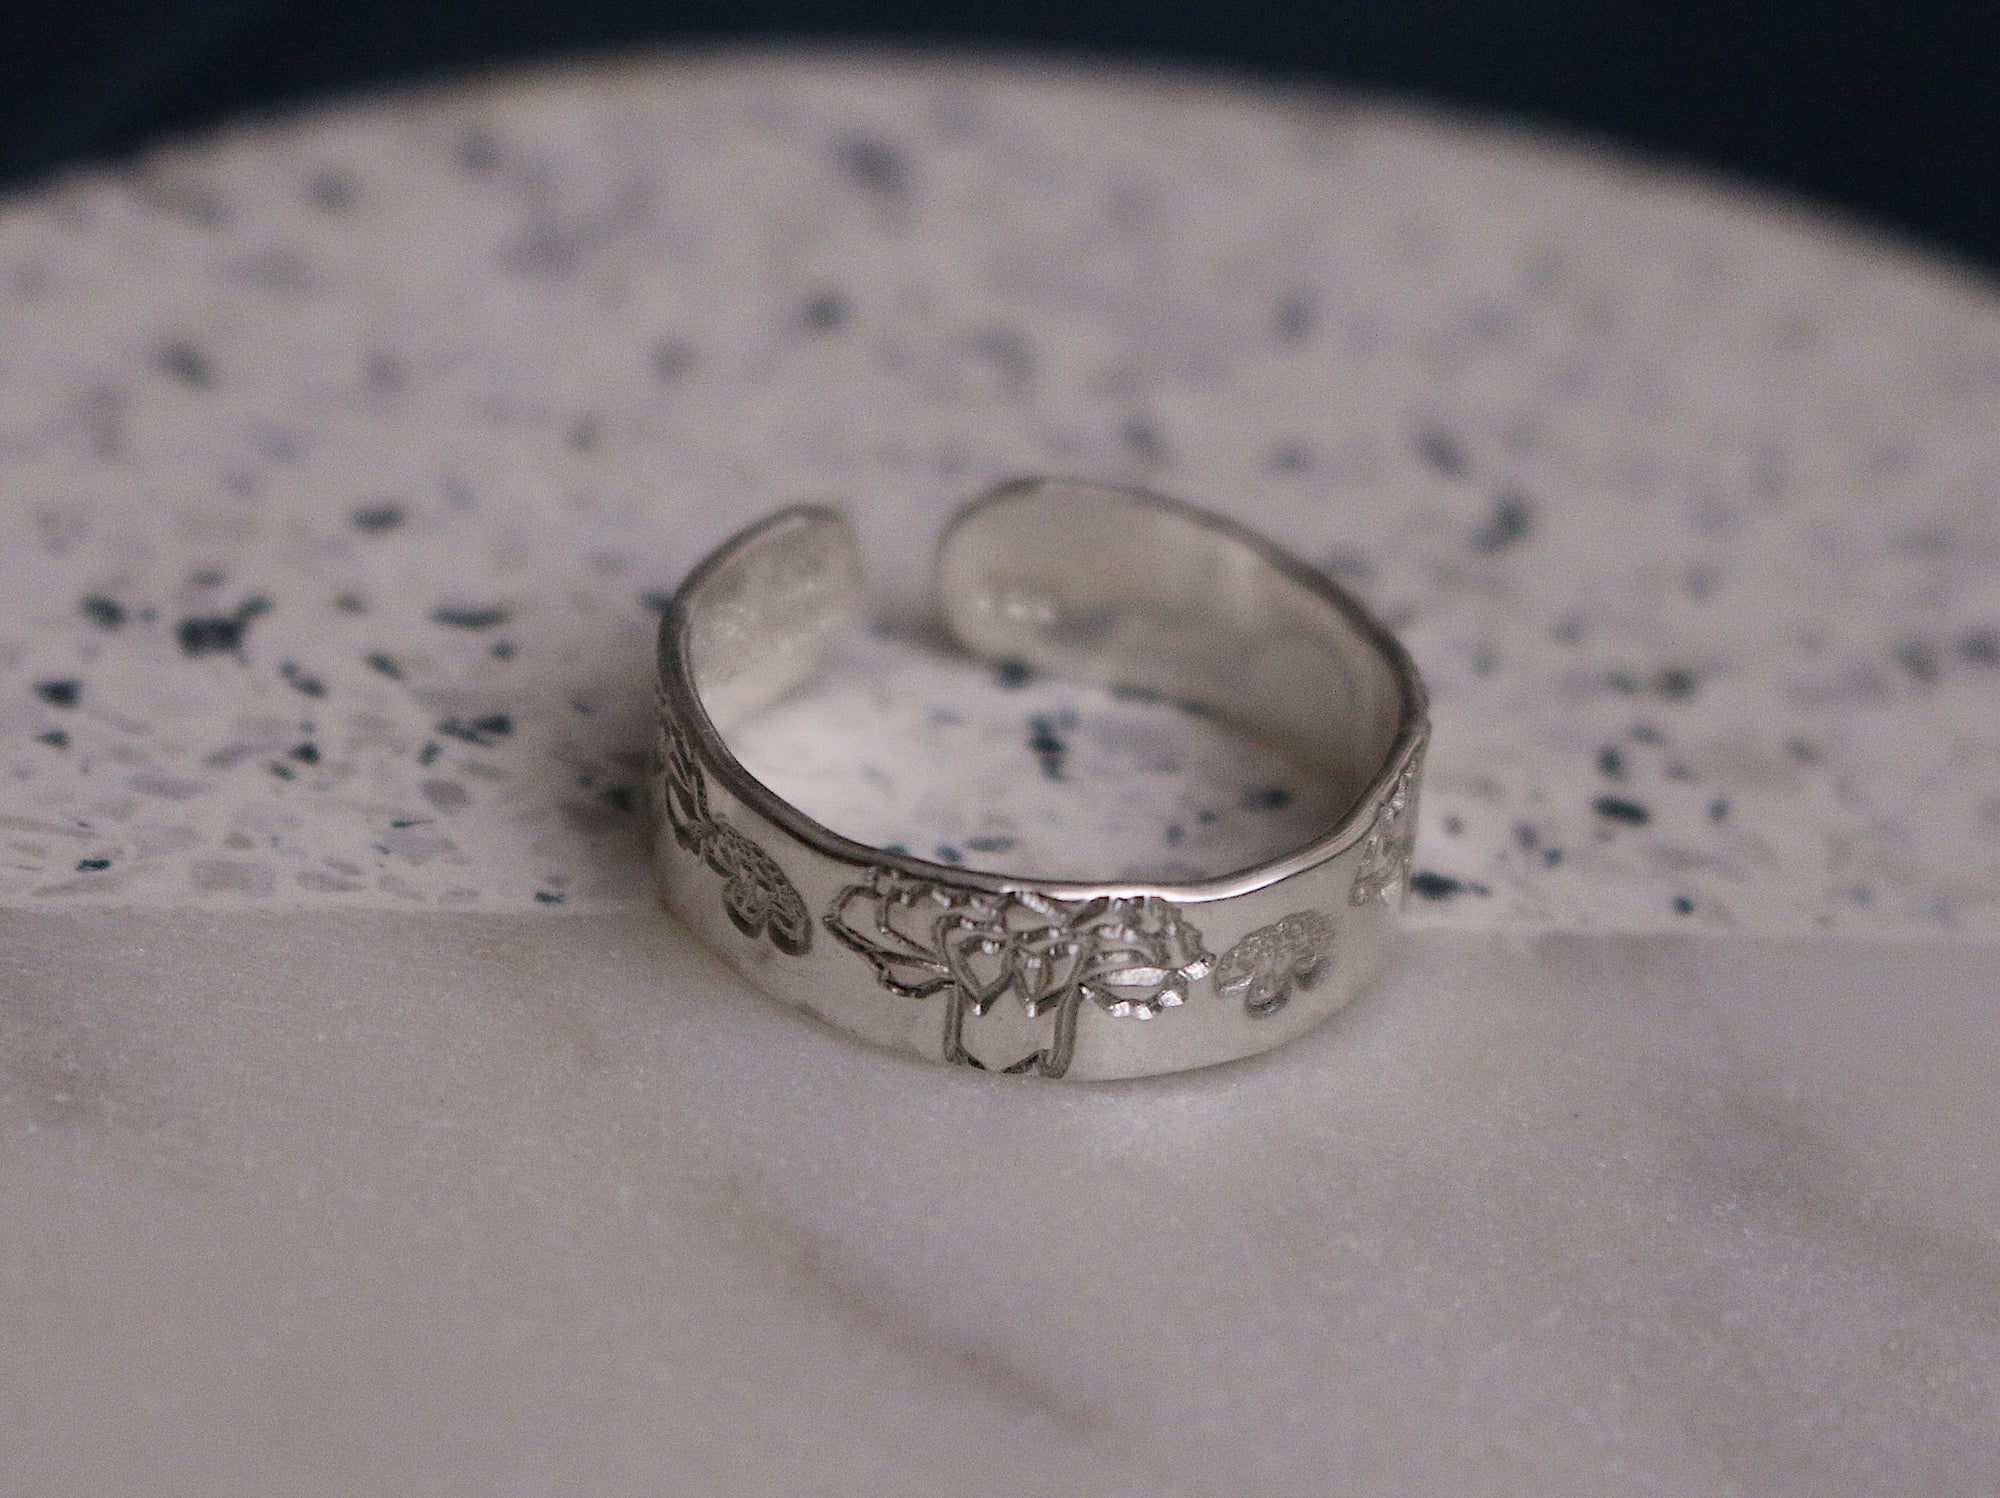 Carnation Ring | January Birth Flower Ring | Best Friend Gift | 14k Gold Filled or Sterling | Floral Jewelry | January Birth Ring